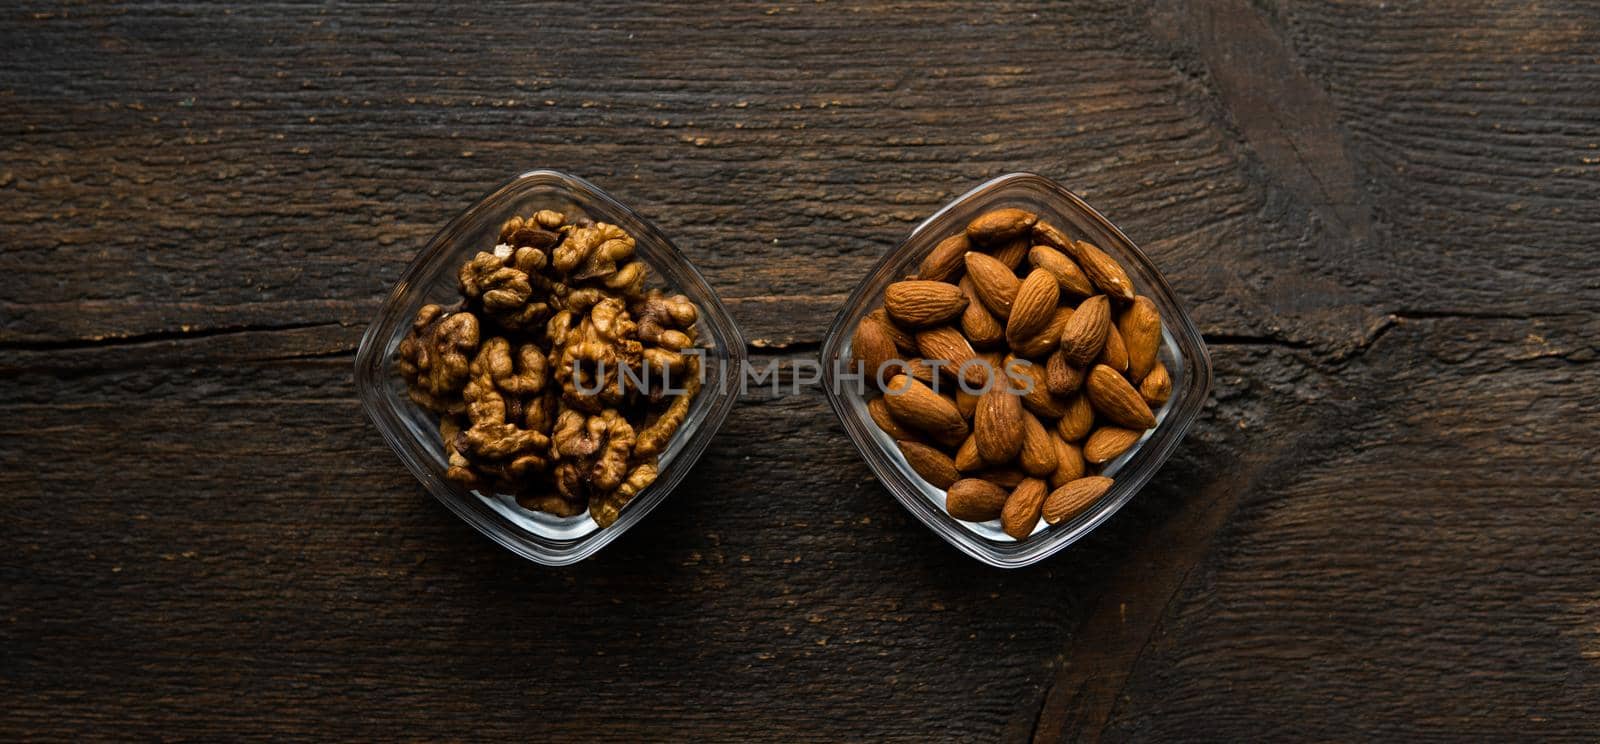 Almond and walnut in a small plates which standing on a vintage wooden table. Nuts is a healthy vegetarian protein and nutritious food. by vovsht